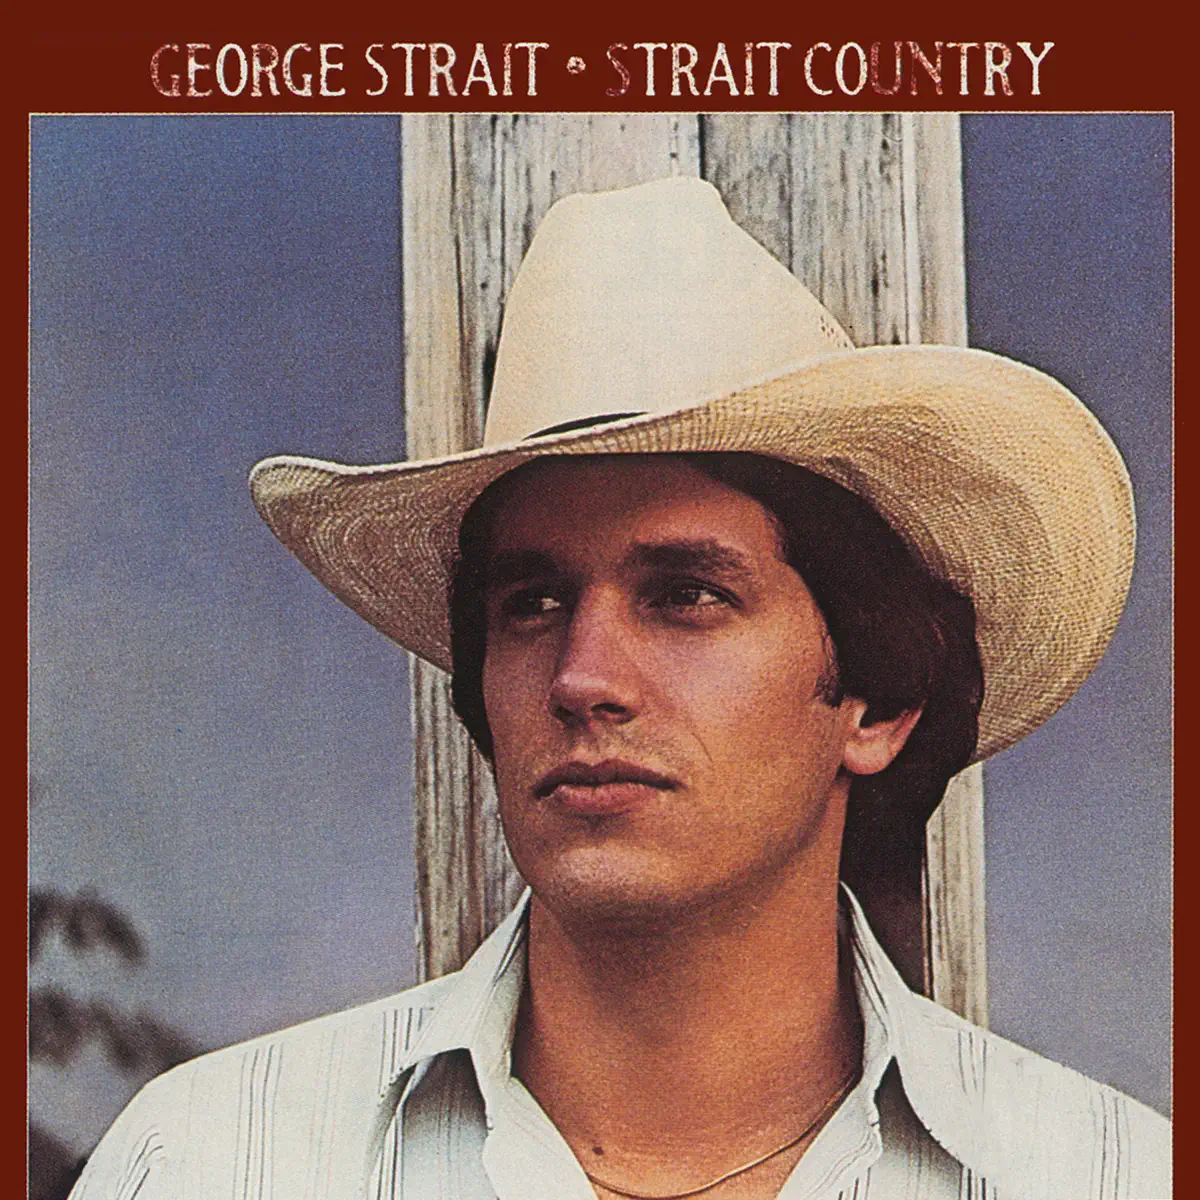 George Strait - Strait Country (1981) [iTunes Plus AAC M4A]-新房子